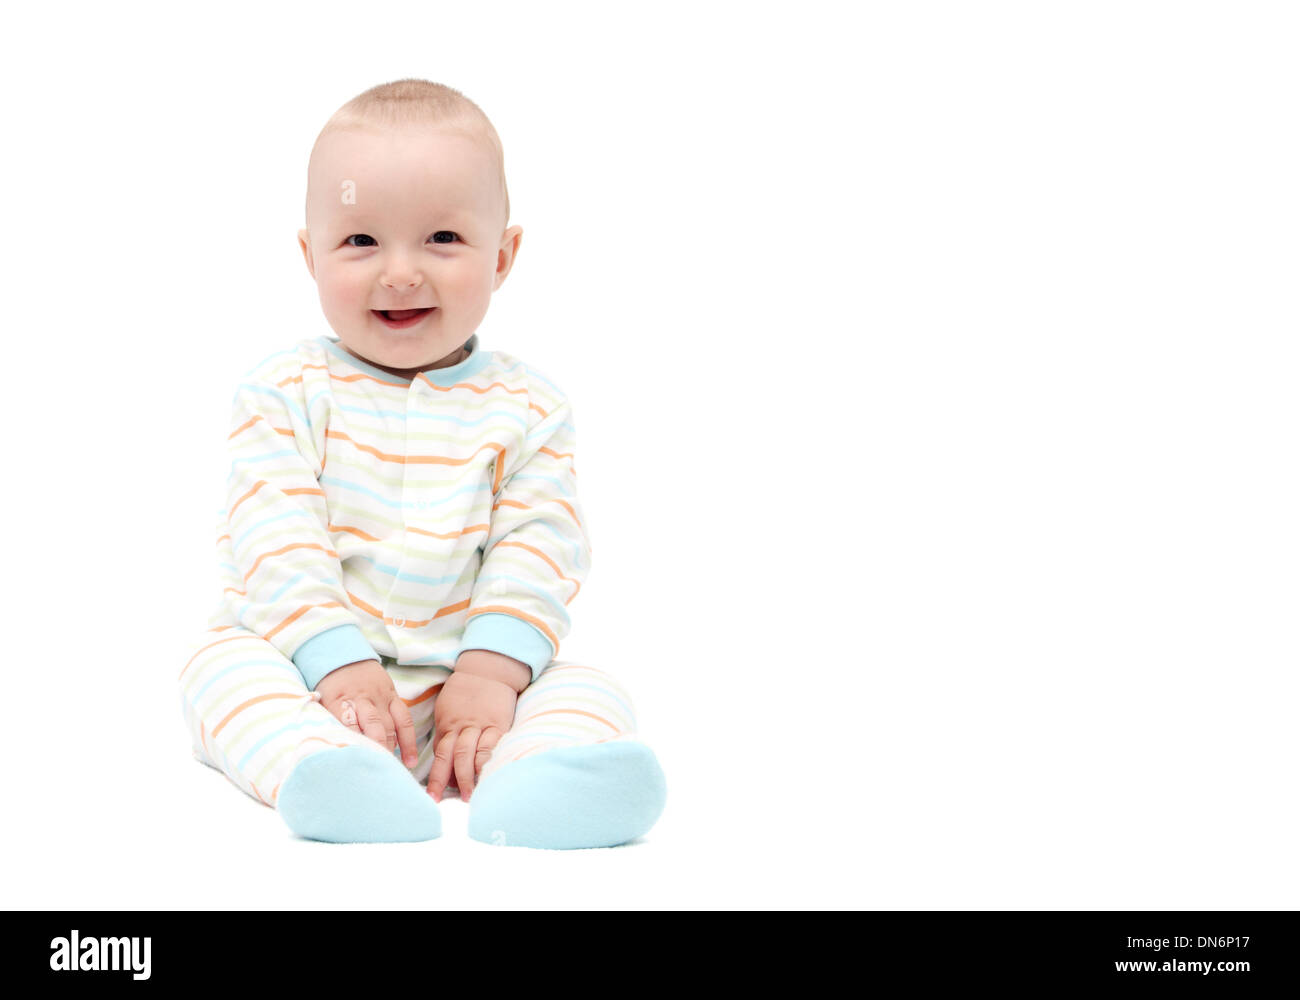 Belle laughing baby boy sitting on white background Banque D'Images